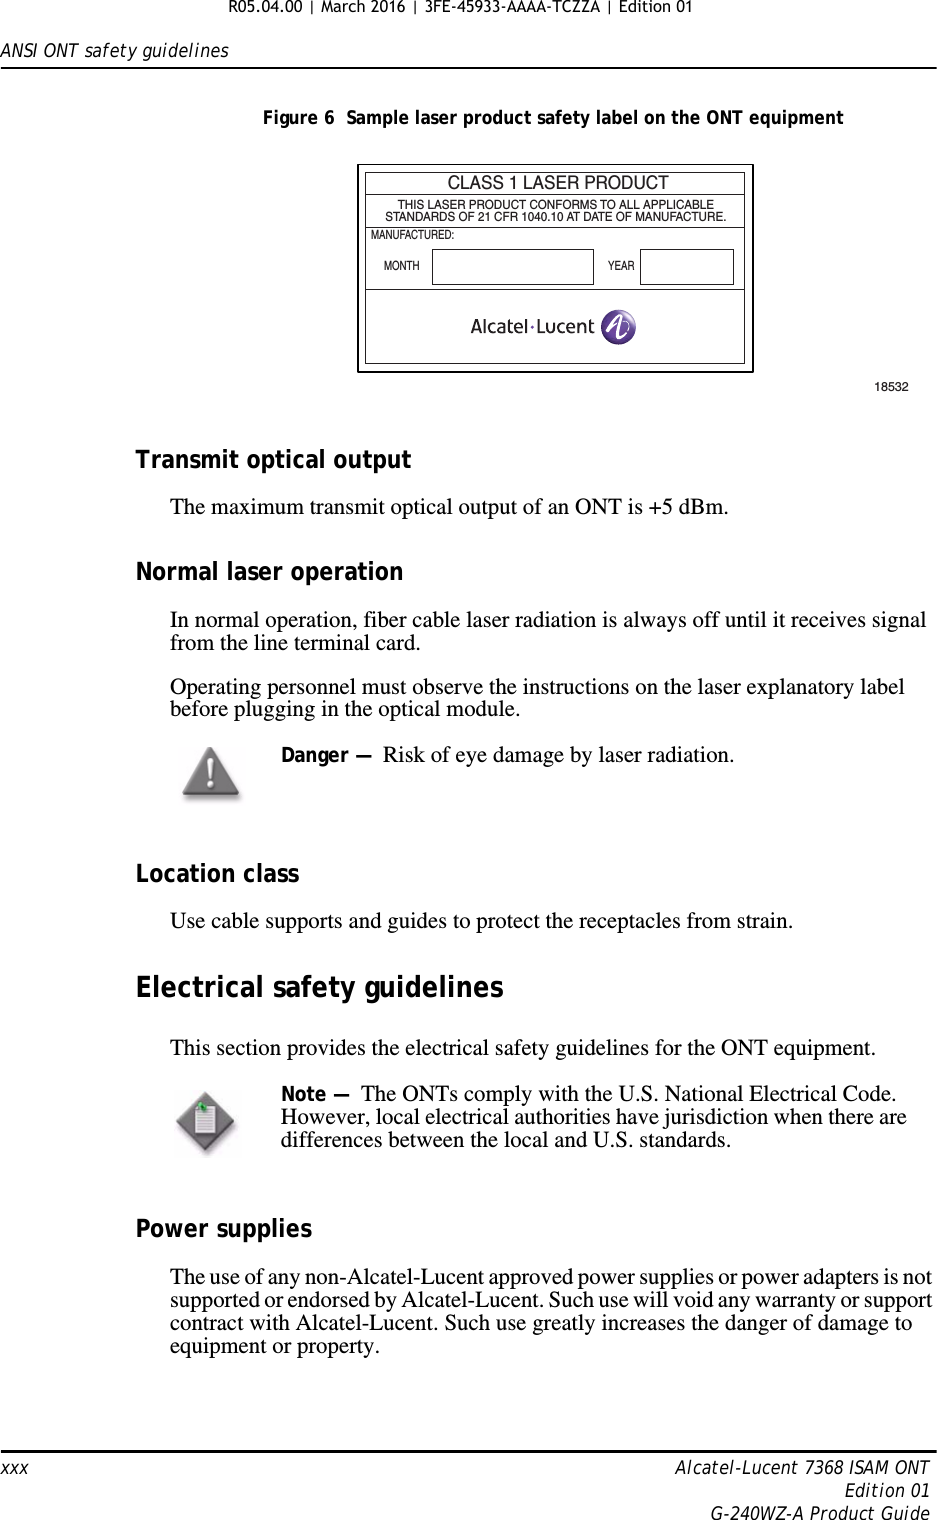 ANSI ONT safety guidelinesxxx Alcatel-Lucent 7368 ISAM ONTEdition 01G-240WZ-A Product GuideFigure 6  Sample laser product safety label on the ONT equipmentTransmit optical outputThe maximum transmit optical output of an ONT is +5 dBm.Normal laser operationIn normal operation, fiber cable laser radiation is always off until it receives signal from the line terminal card.Operating personnel must observe the instructions on the laser explanatory label before plugging in the optical module.Location classUse cable supports and guides to protect the receptacles from strain.Electrical safety guidelinesThis section provides the electrical safety guidelines for the ONT equipment.Power suppliesThe use of any non-Alcatel-Lucent approved power supplies or power adapters is not supported or endorsed by Alcatel-Lucent. Such use will void any warranty or support contract with Alcatel-Lucent. Such use greatly increases the danger of damage to equipment or property.CLASS 1 LASER PRODUCTTHIS LASER PRODUCT CONFORMS TO ALL APPLICABLESTANDARDS OF 21 CFR 1040.10 AT DATE OF MANUFACTURE.MANUFACTURED:MONTH YEAR18532Danger —  Risk of eye damage by laser radiation.Note —  The ONTs comply with the U.S. National Electrical Code. However, local electrical authorities have jurisdiction when there are differences between the local and U.S. standards.R05.04.00 | March 2016 | 3FE-45933-AAAA-TCZZA | Edition 01 